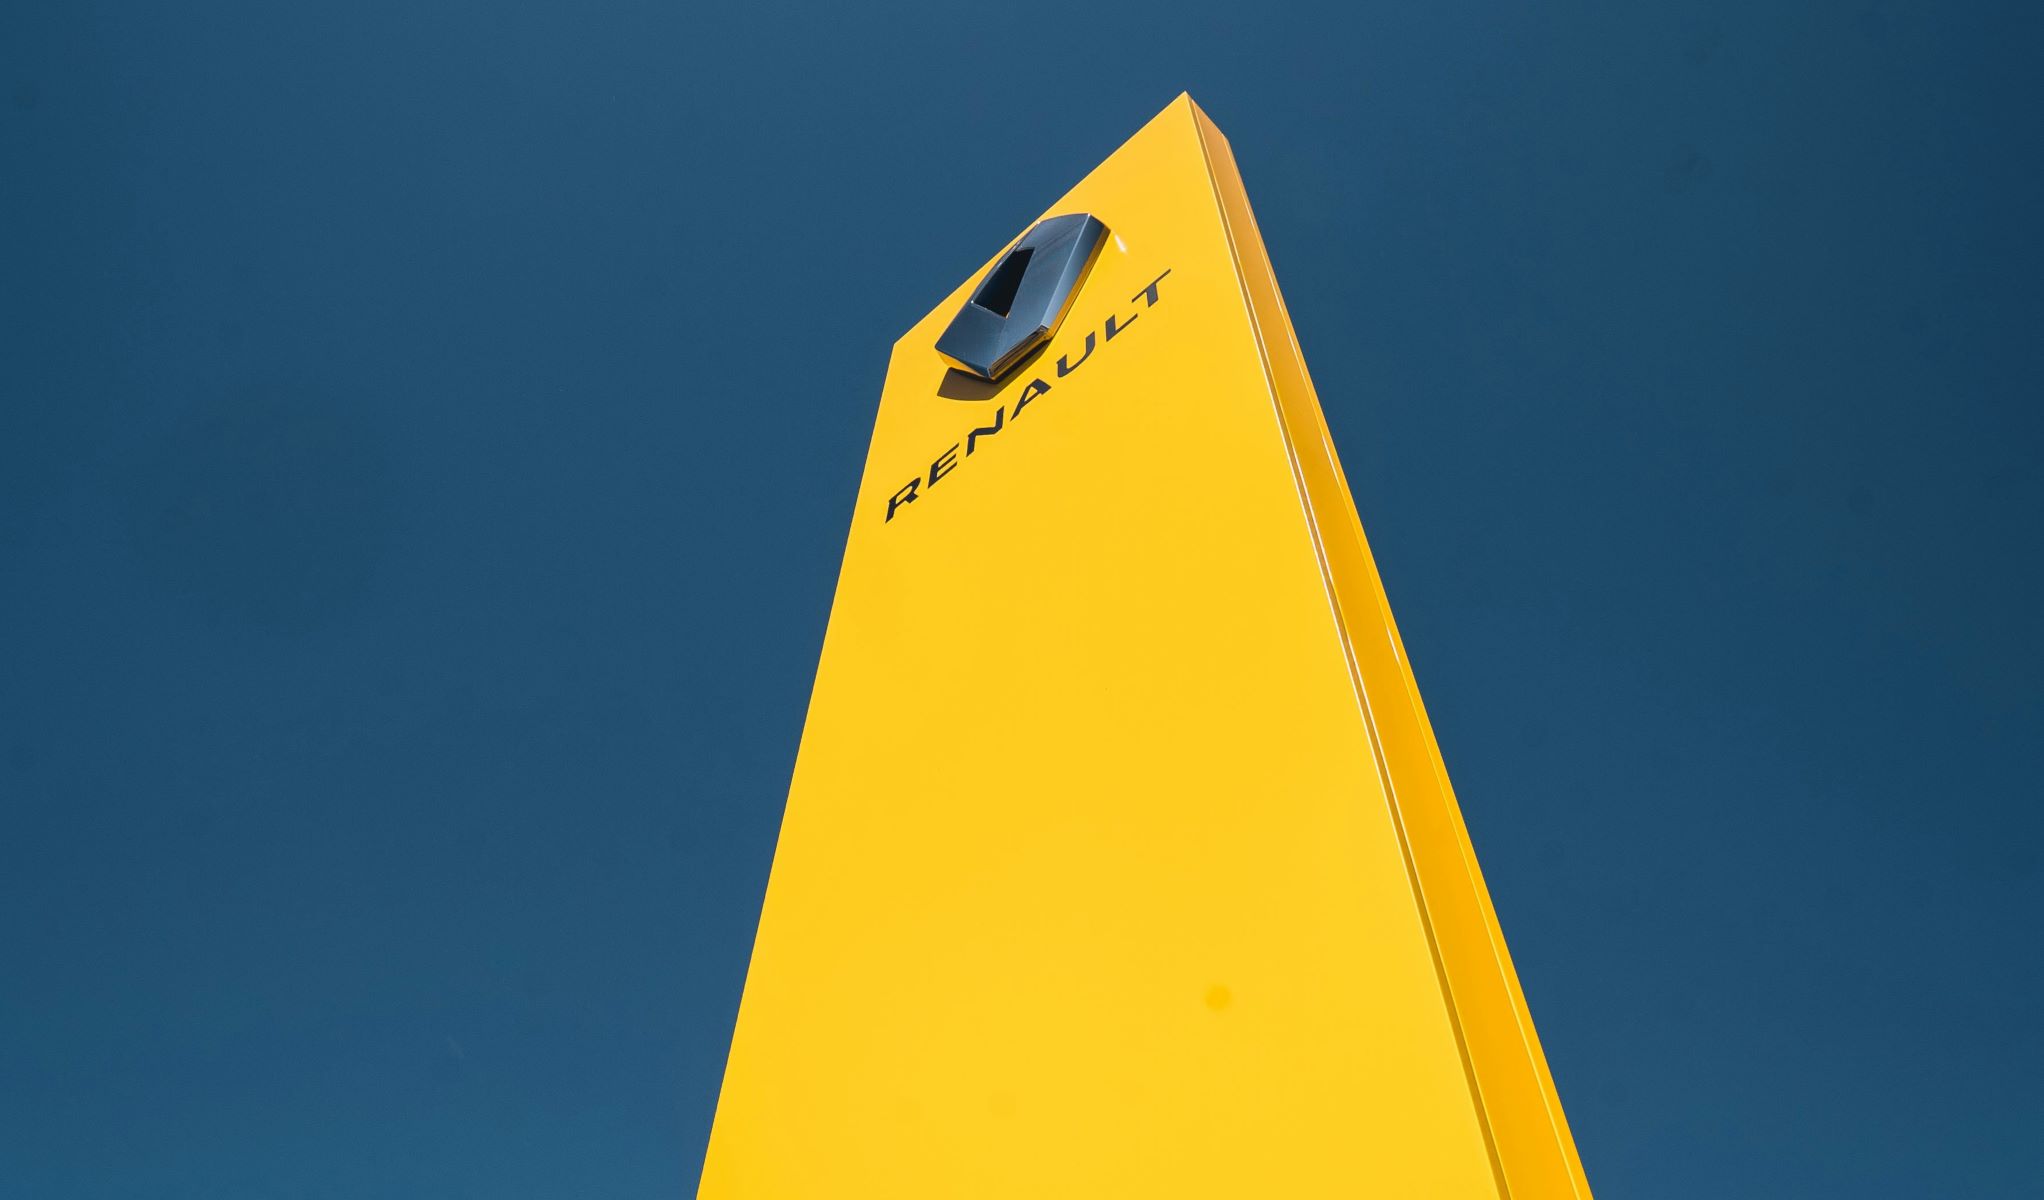 A branded pillar outside the Renault office.